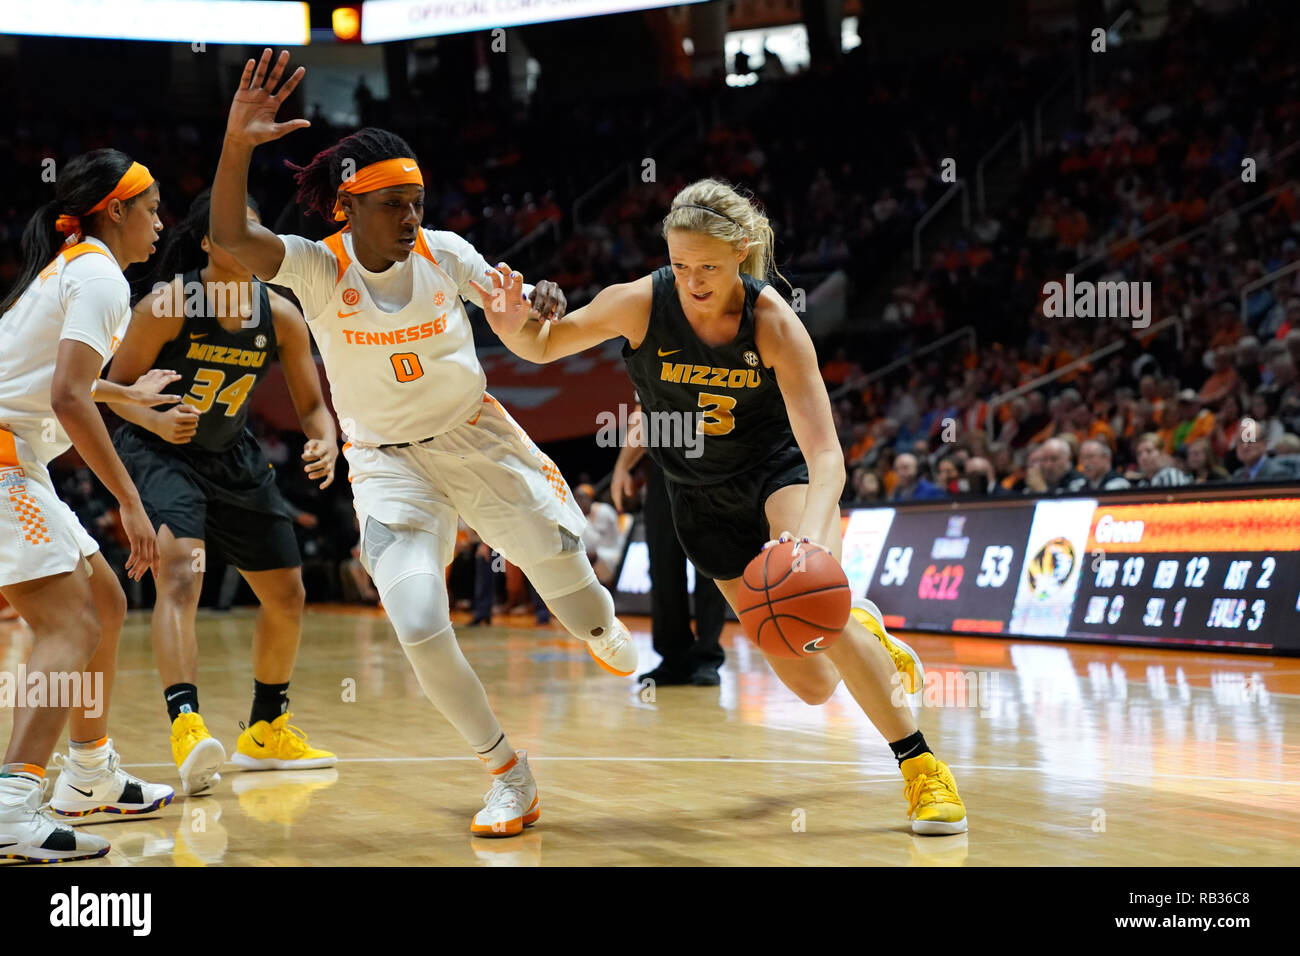 Knoxville, Tennessee, USA. 06th Jan, 2019. January 6, 2019: Sophie Cunningham #3 of the Missouri Tigers drives to the basket against Rennia Davis #0 of the Tennessee Lady Volunteers during the NCAA basketball game between the University of Tennessee Lady Volunteers and the University of Missouri Tigers at Thompson Boling Arena in Knoxville TN Tim Gangloff/CSM Credit: Cal Sport Media/Alamy Live News Stock Photo